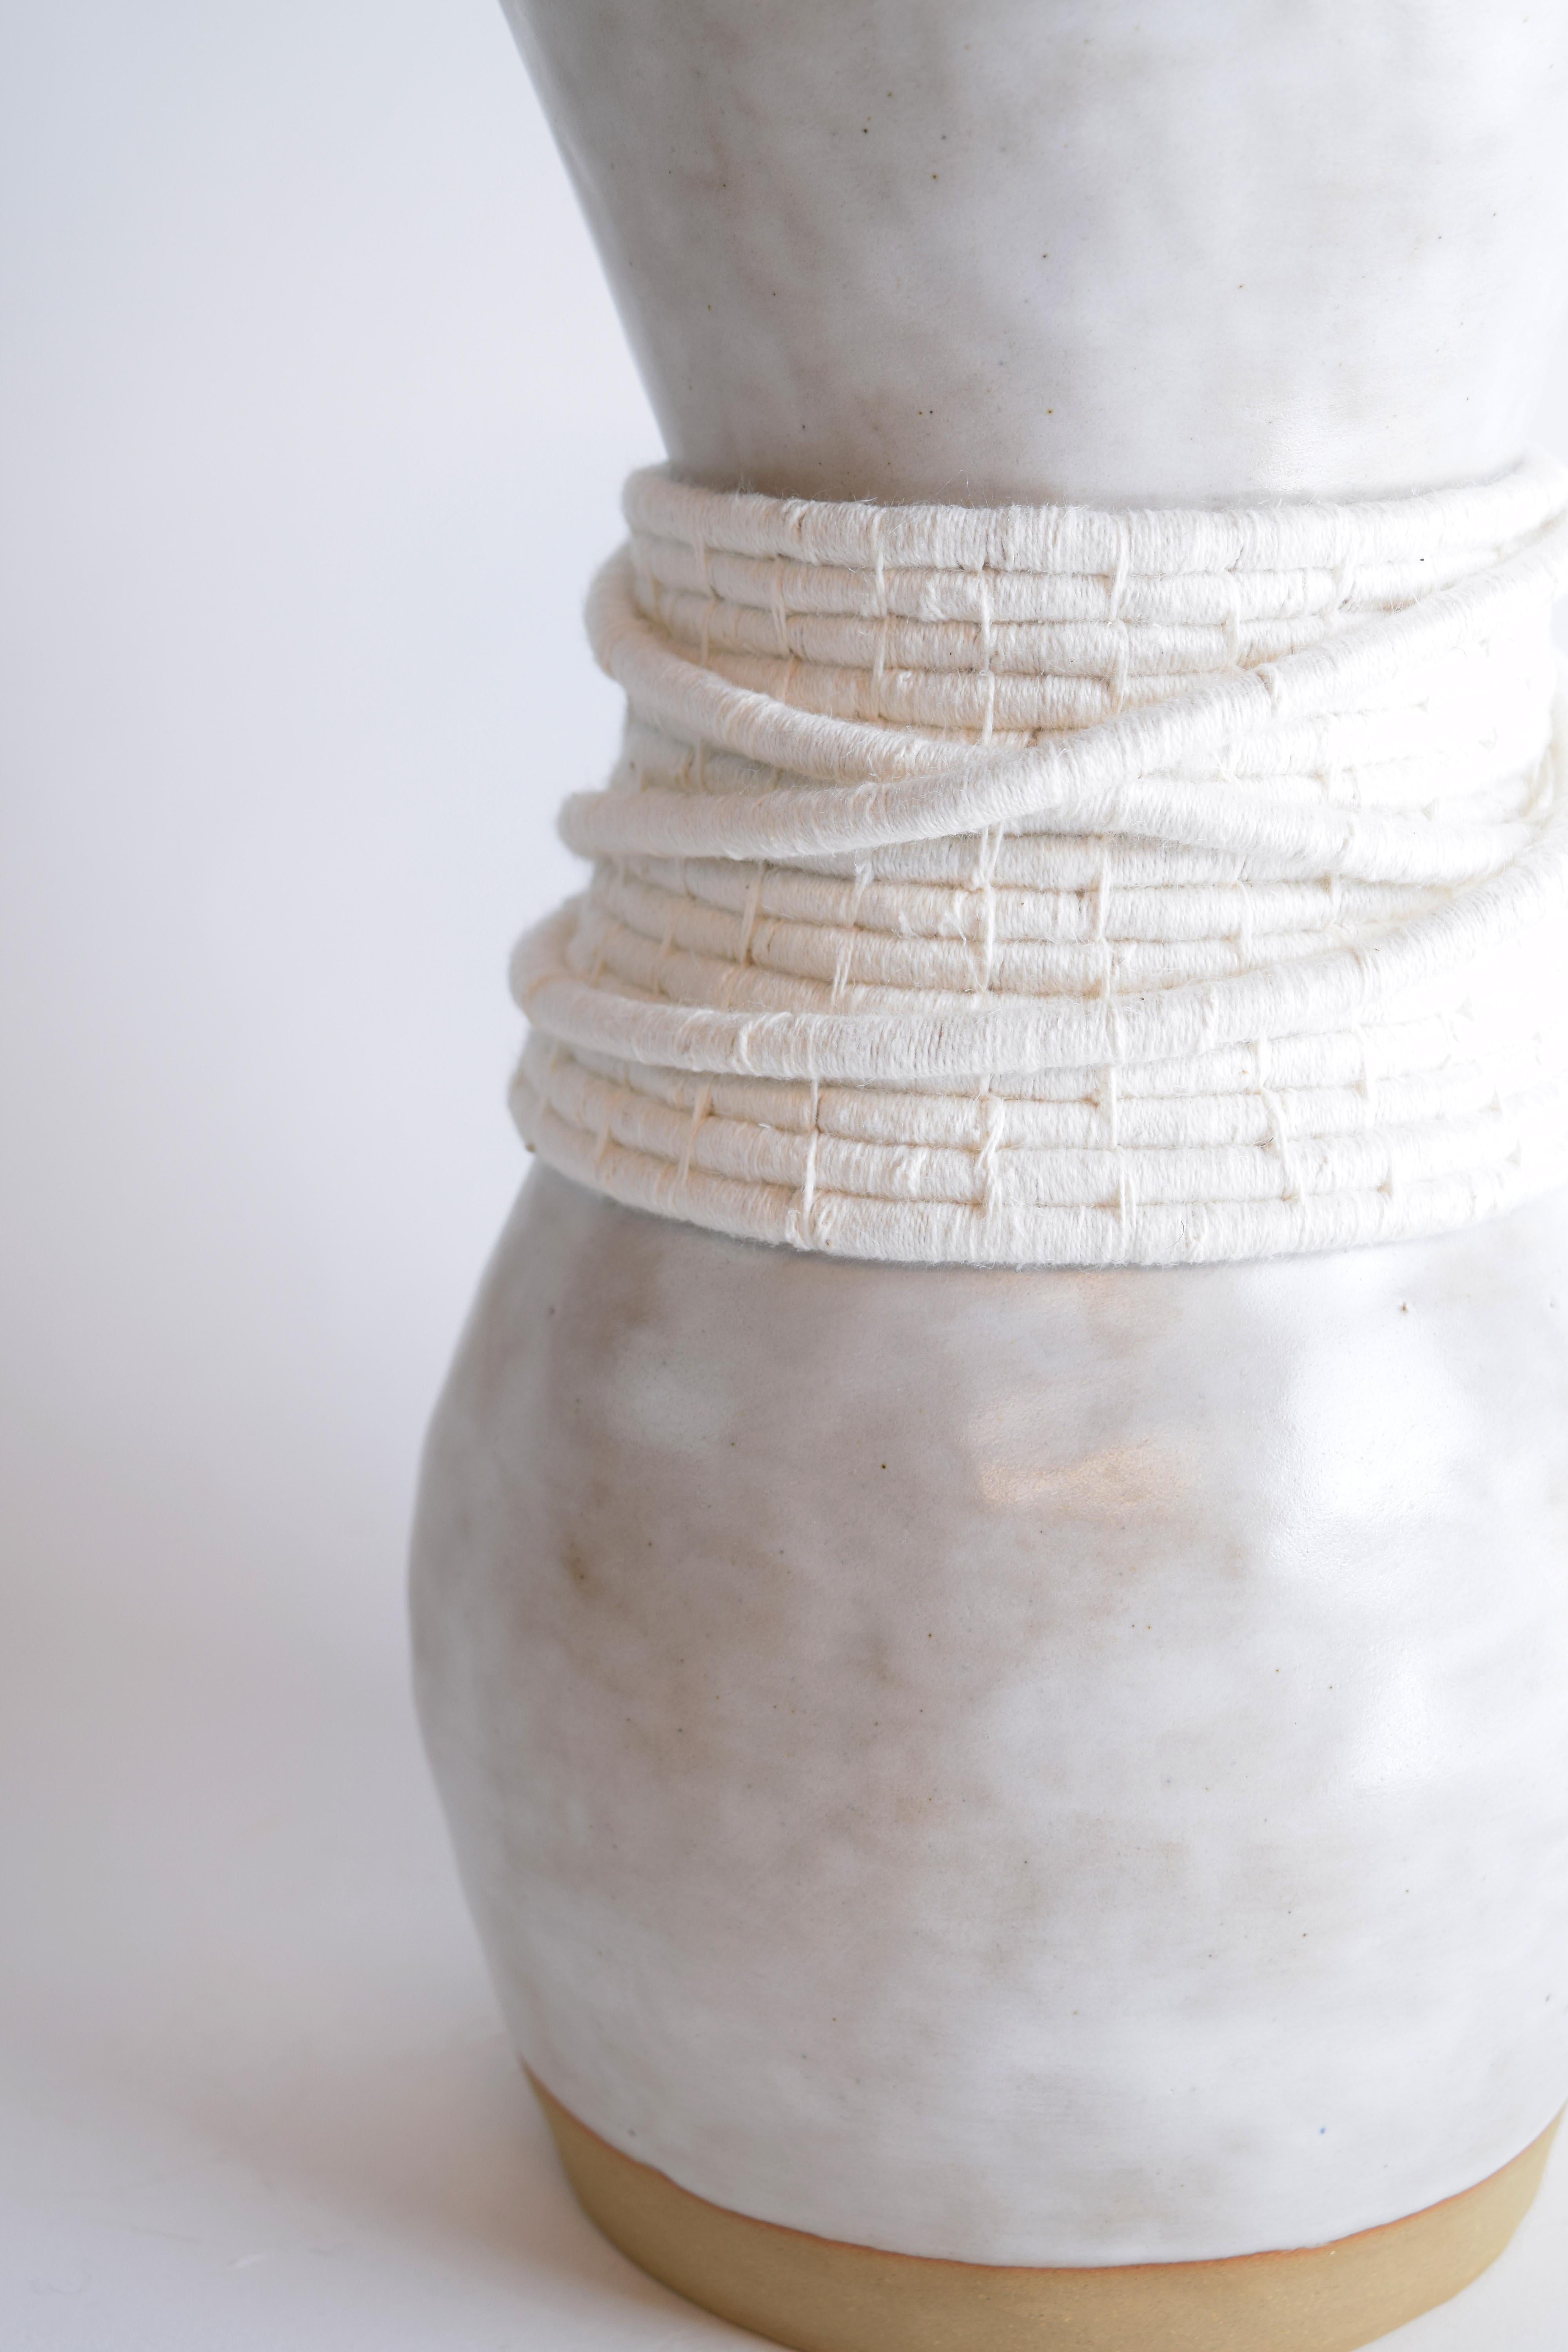 Vase #809 by Karen Gayle Tinney

Hand formed stoneware vase with white glaze. Woven white cotton detailing around the outside. Vase is water tight.

12”H x 6”W

One of a kind collections with a limited number of pieces are released periodically